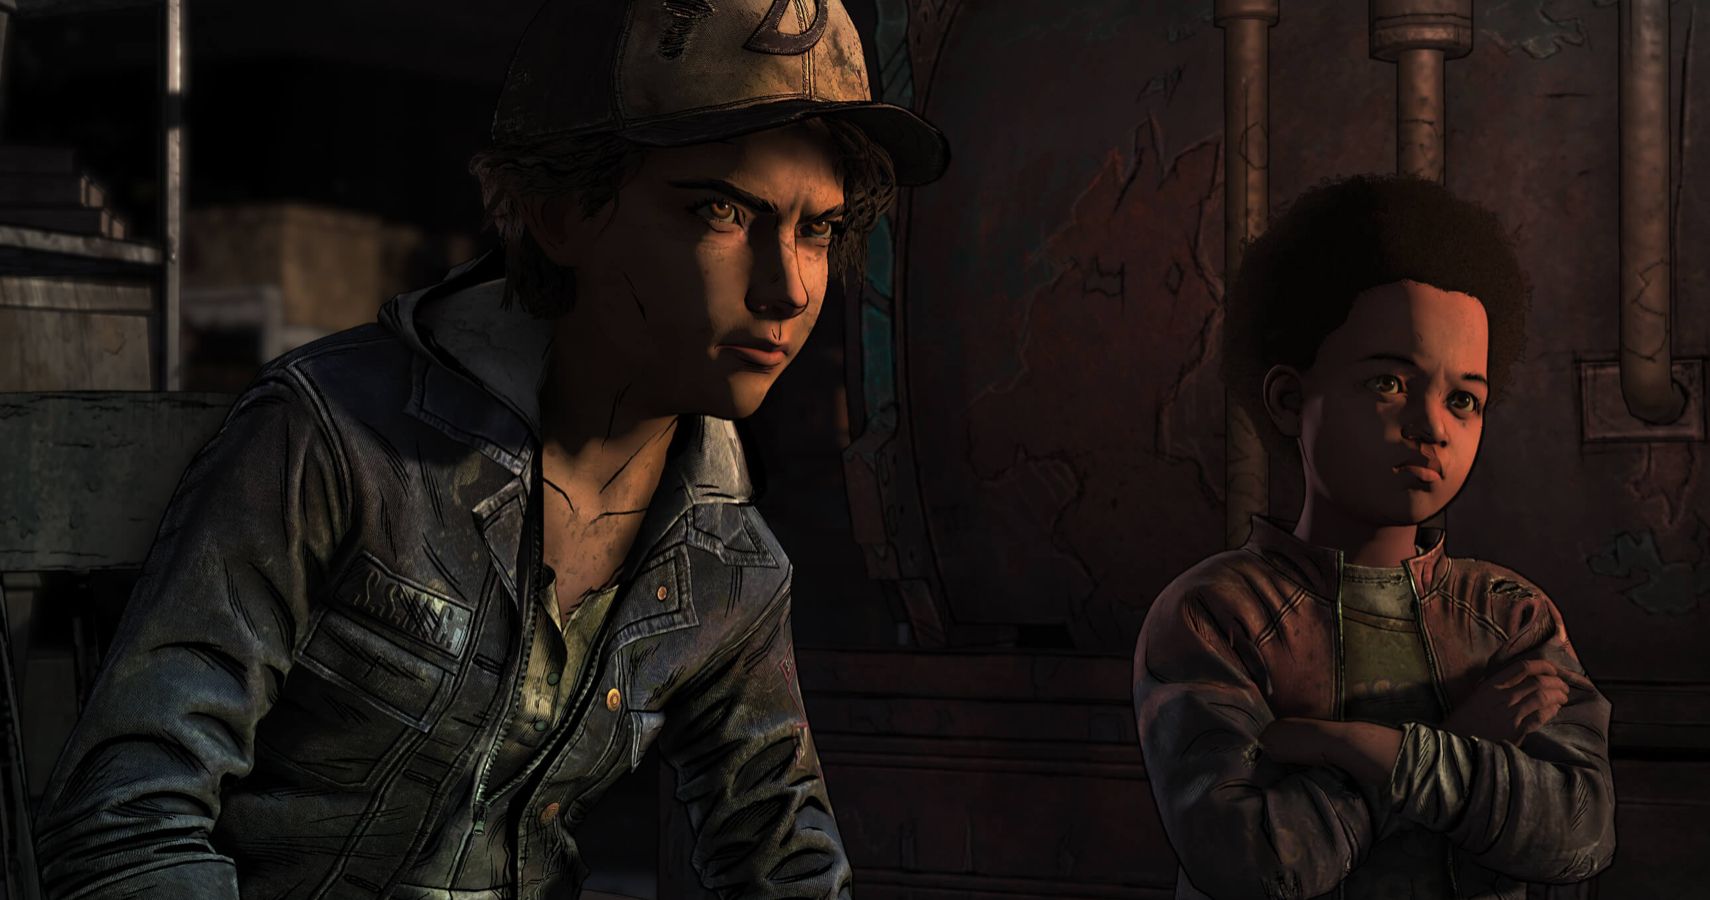 The Walking Dead 5 Reasons The Telltale Games Are Better Than The TV Show ( & 5 Why The Show Is Best)